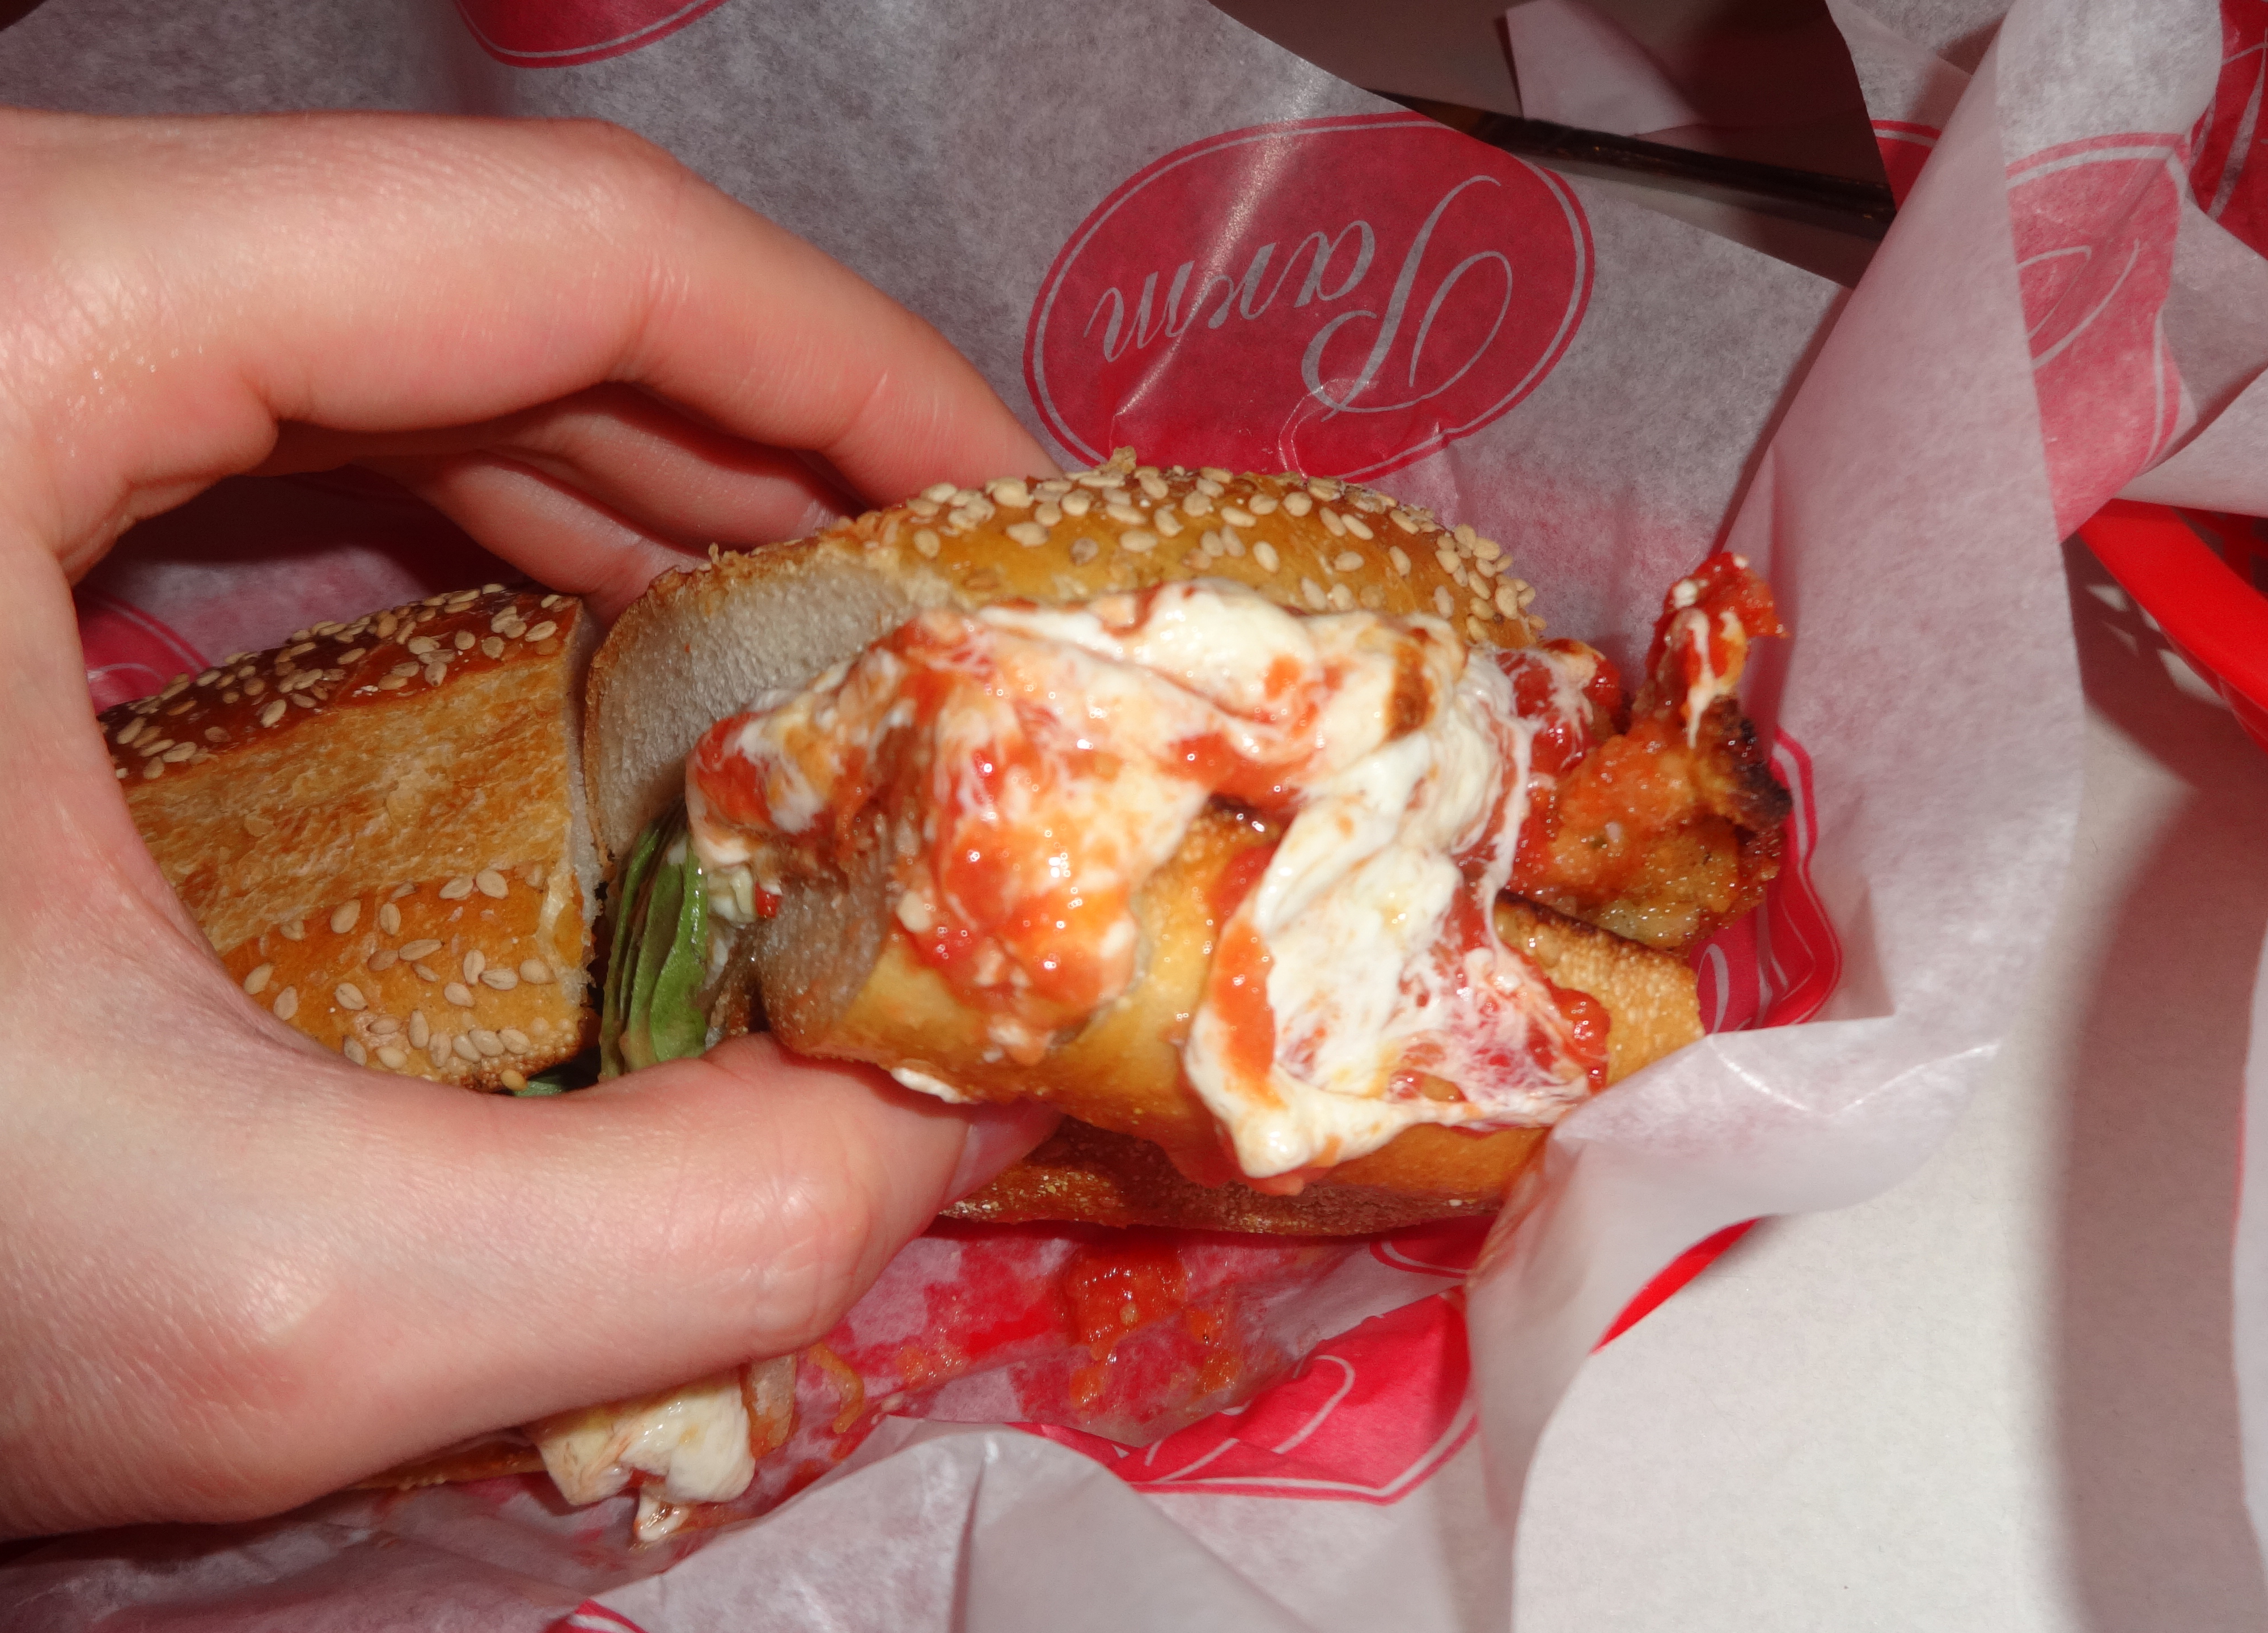 Parm chicken parmesian hoagie holding